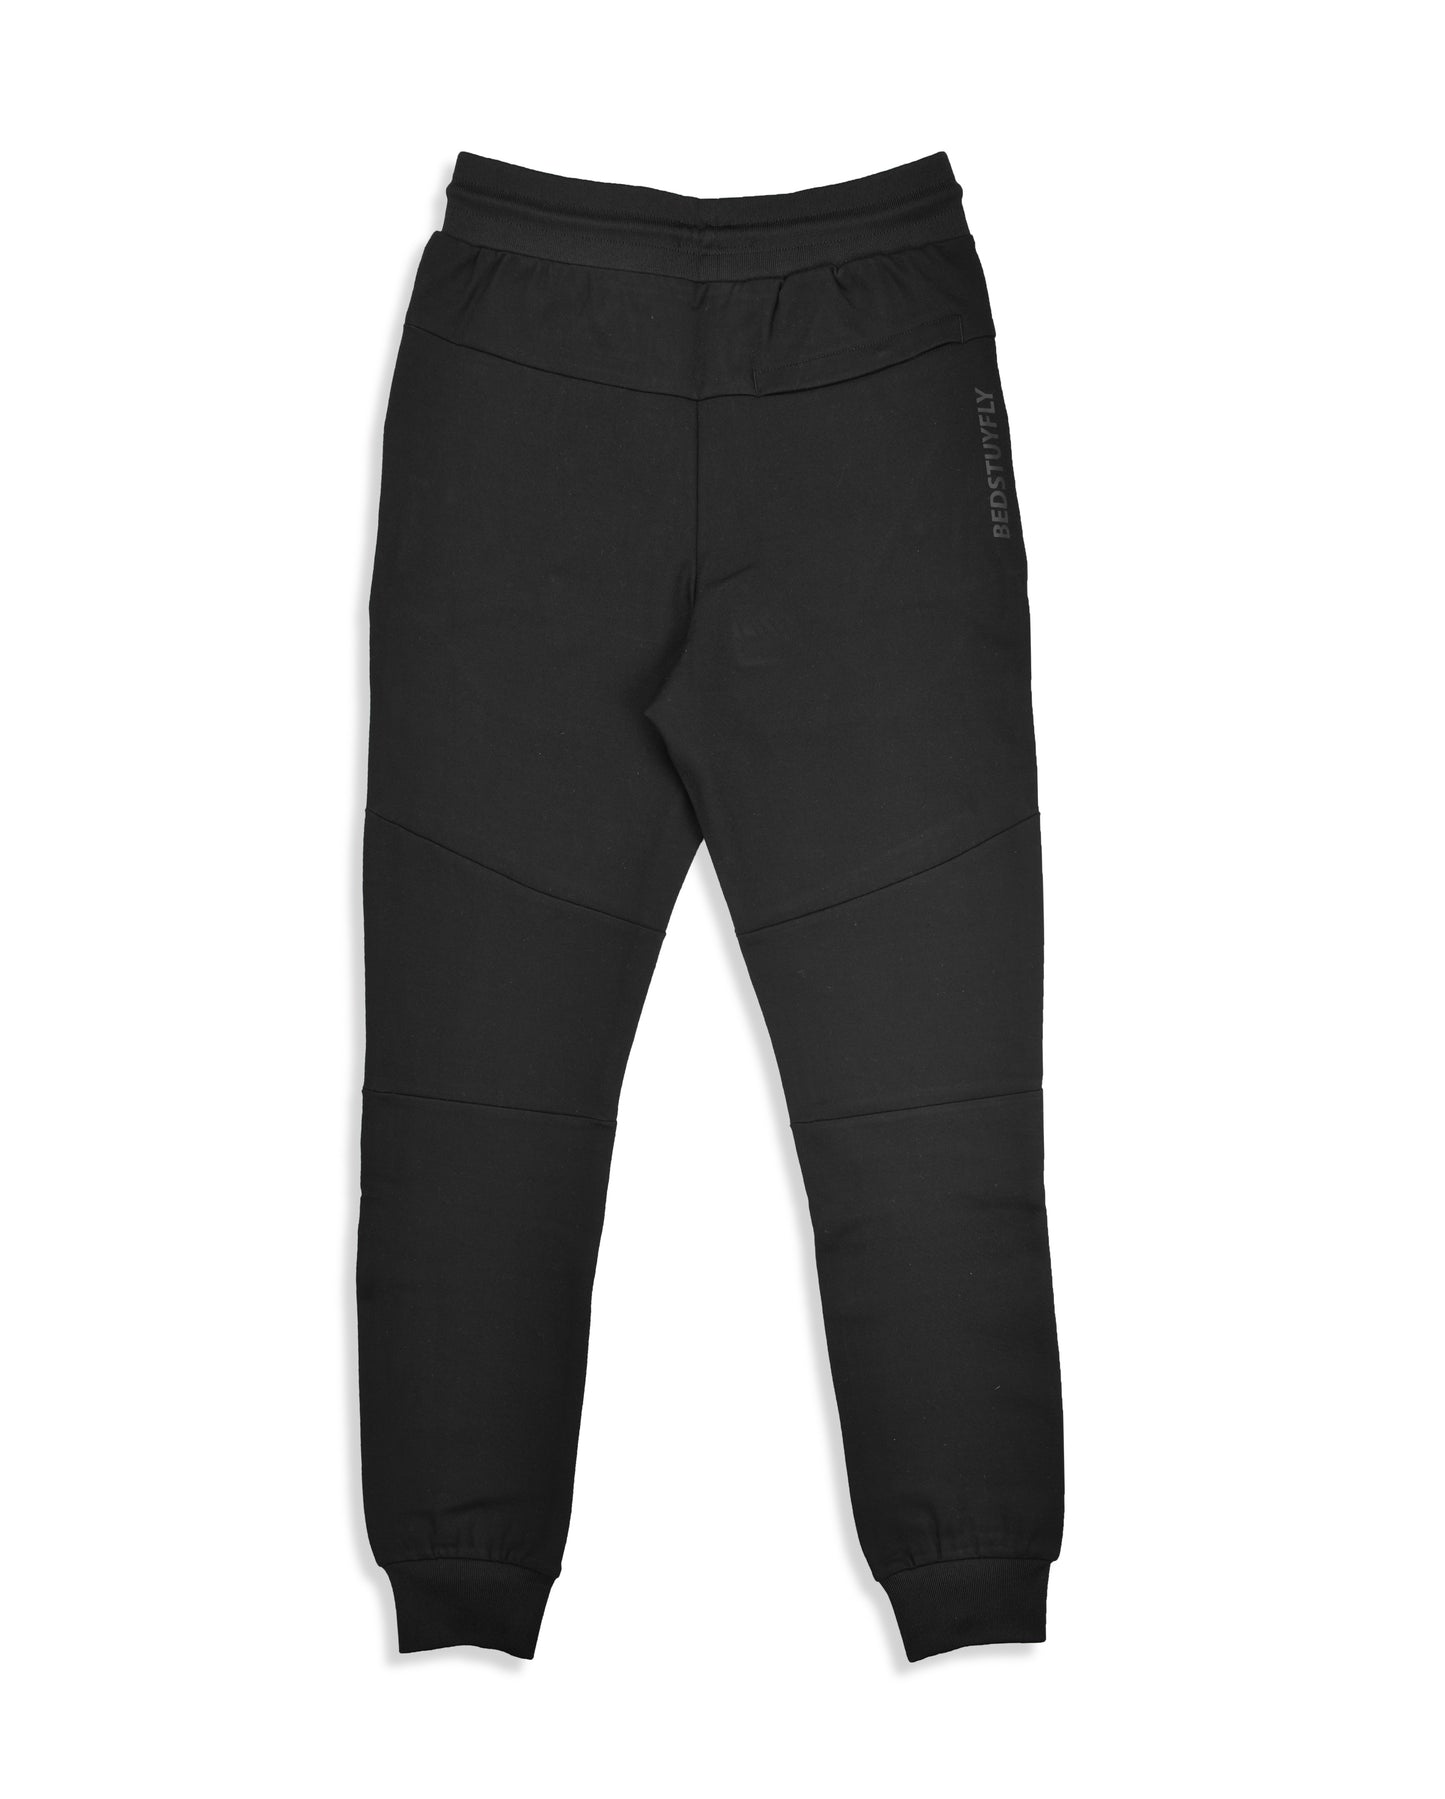 Private Collection Pants (Black) - Bedstuyfly